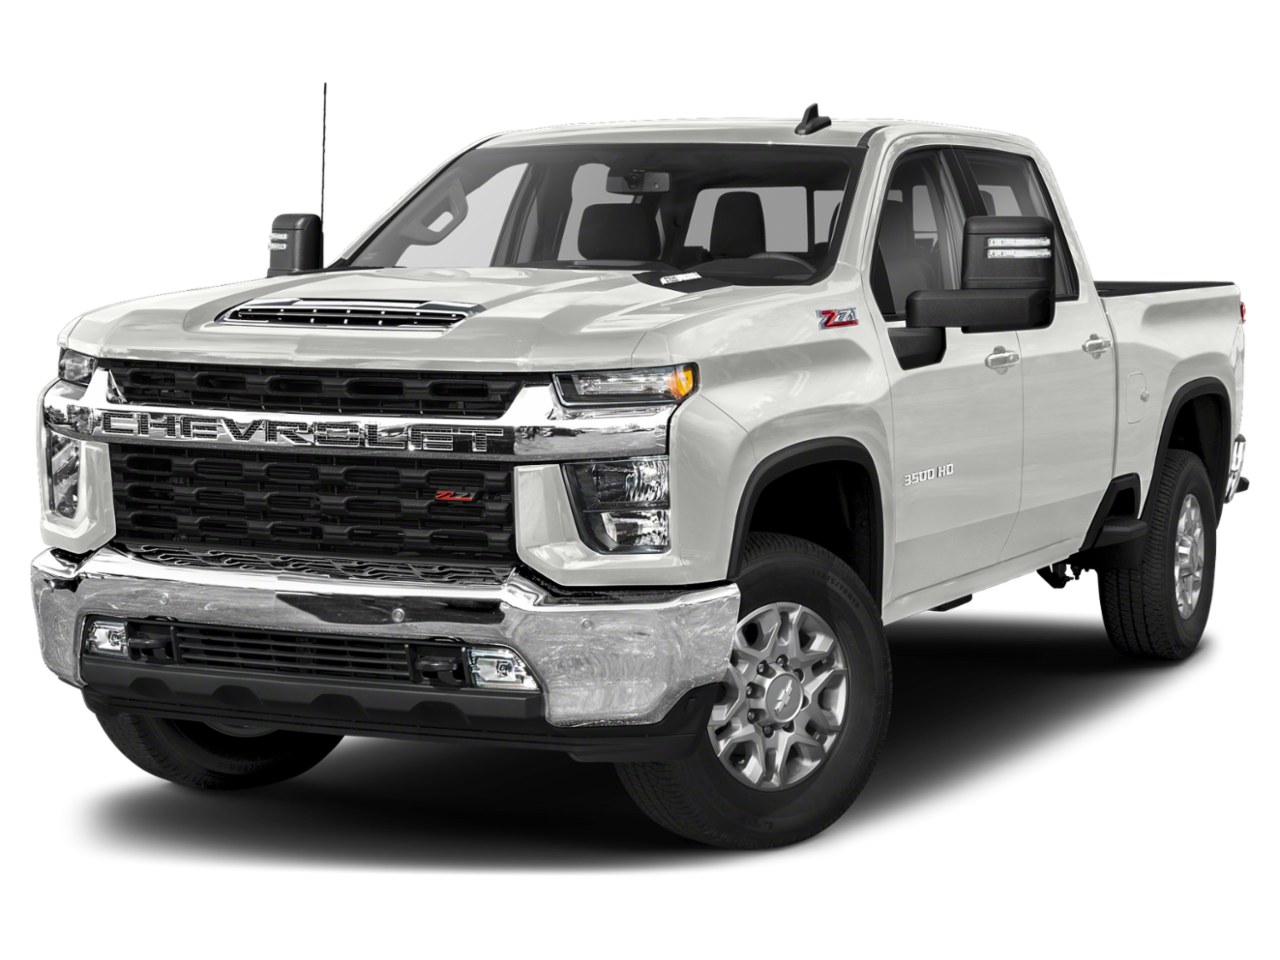 New Chevrolet Silverado 3500HD from your East Providence, RI dealership